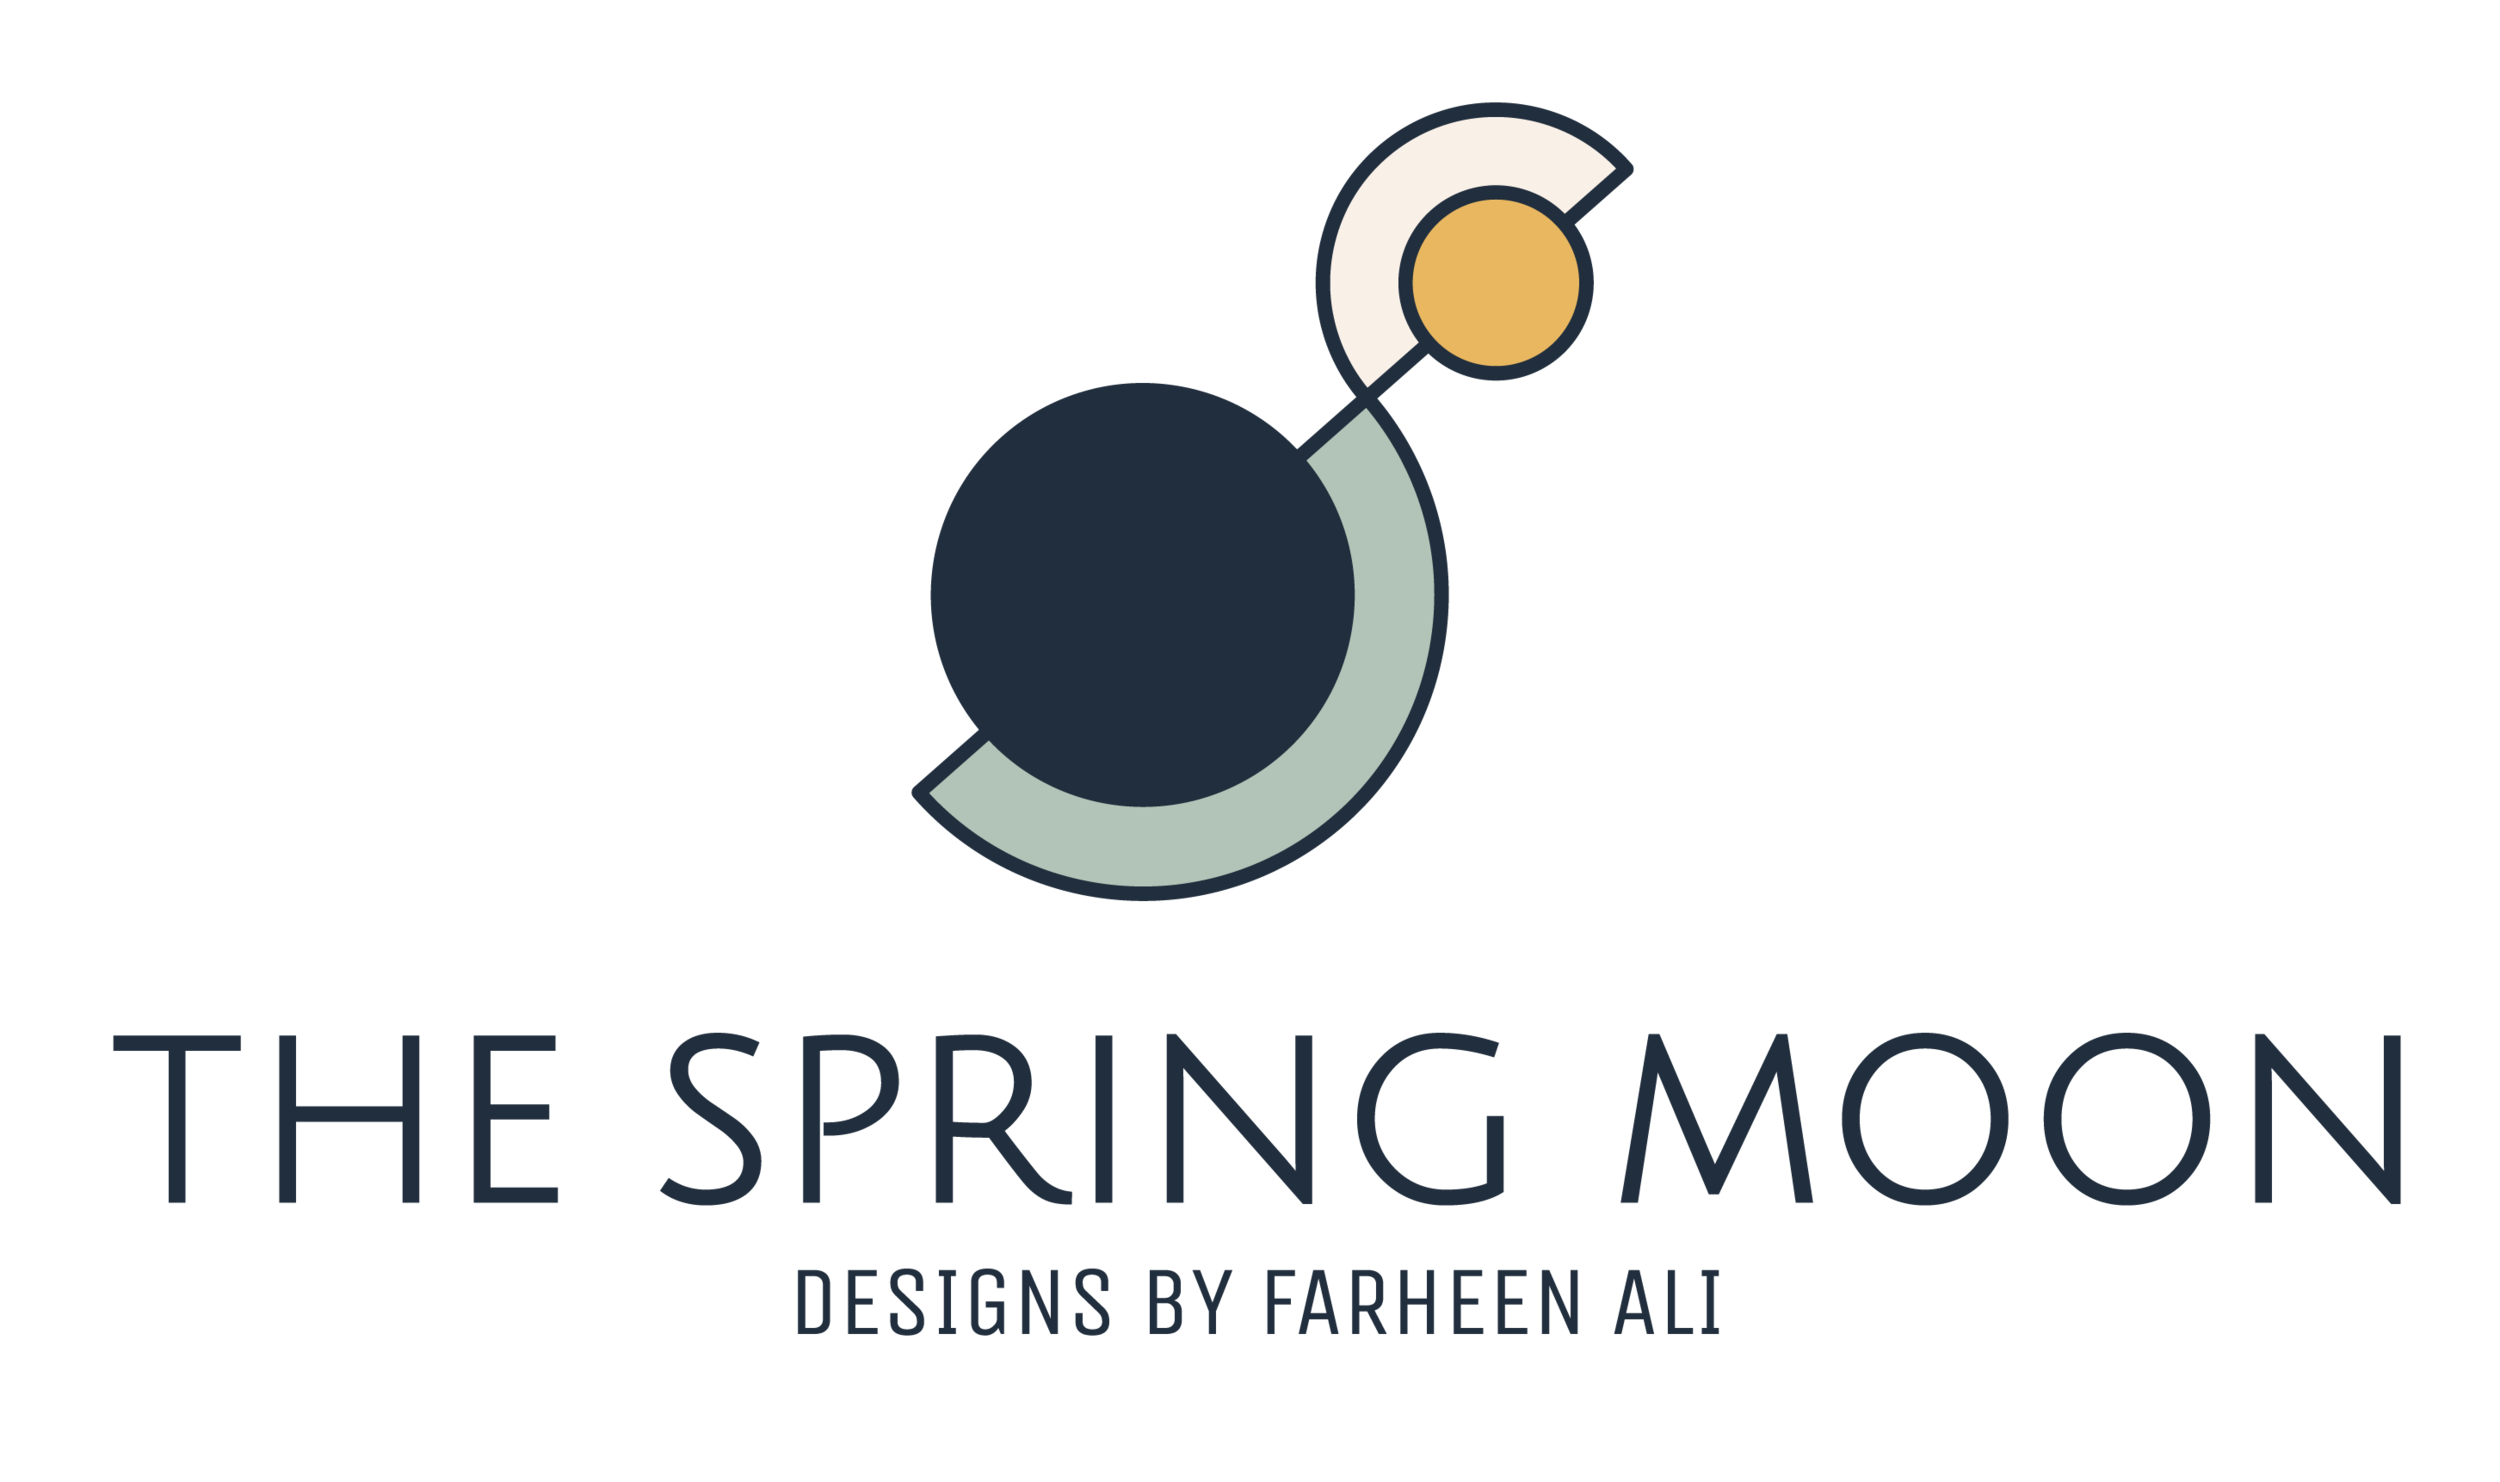 THE SPRING MOON